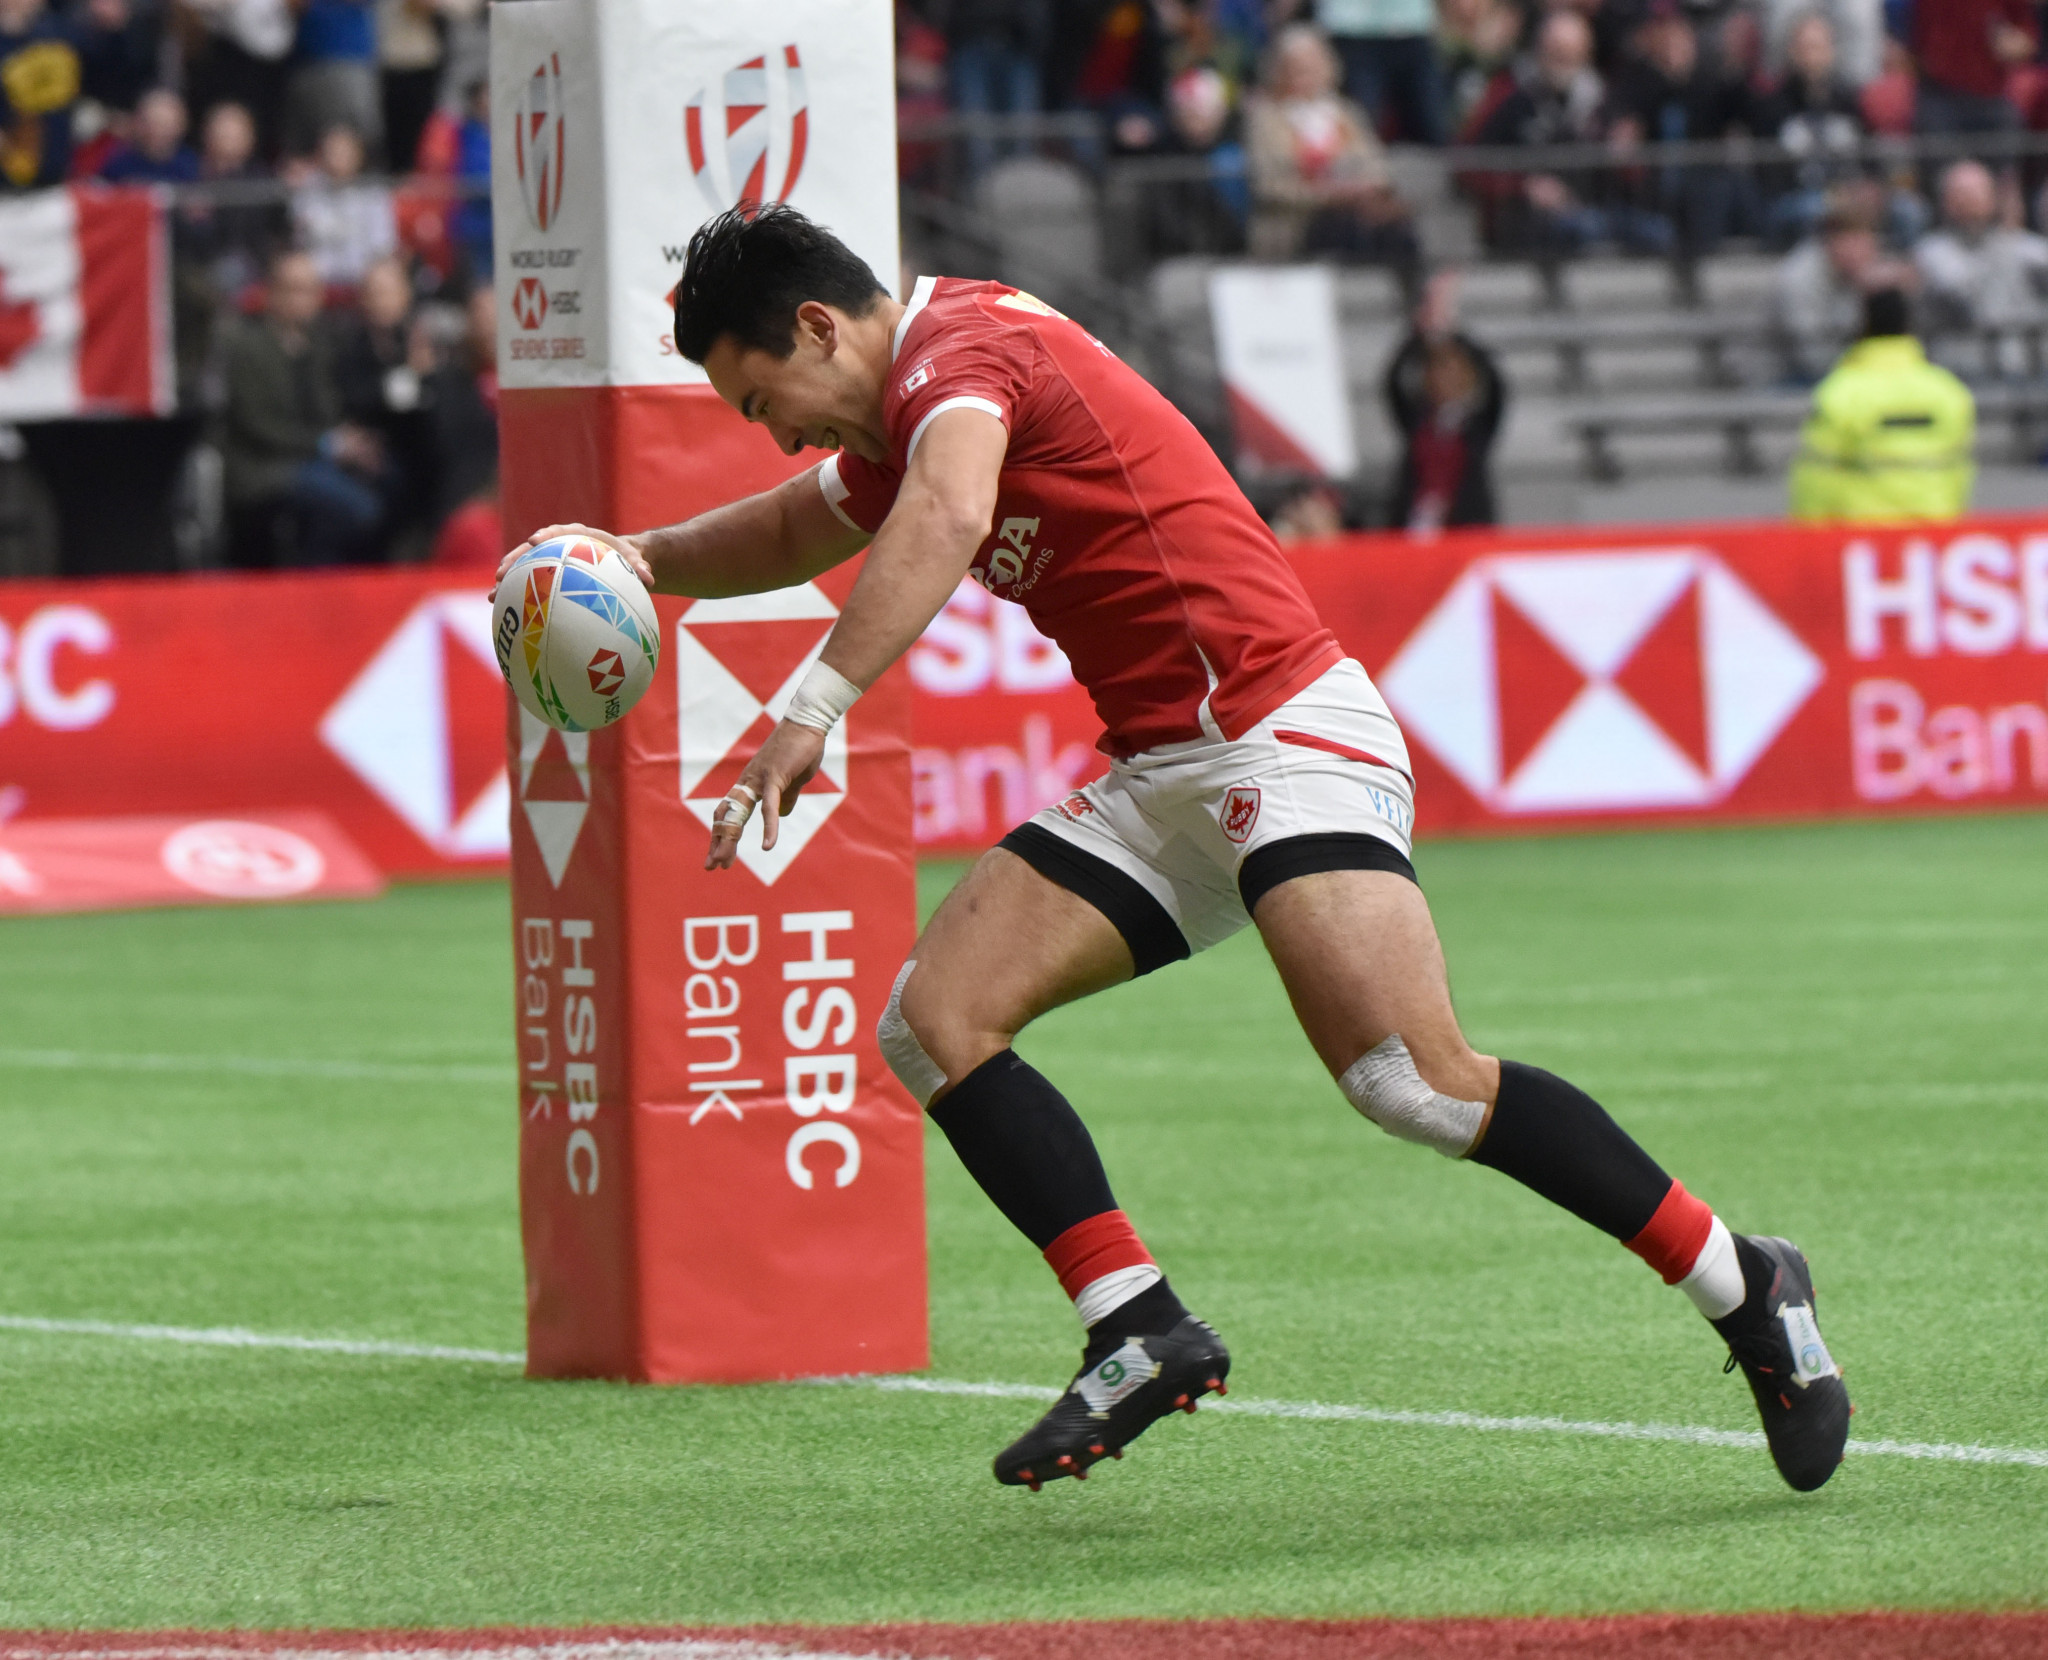 Canada recorded victories in all three of their matches on the opening day of the World Rugby Sevens Series in Vancouver ©Getty Images